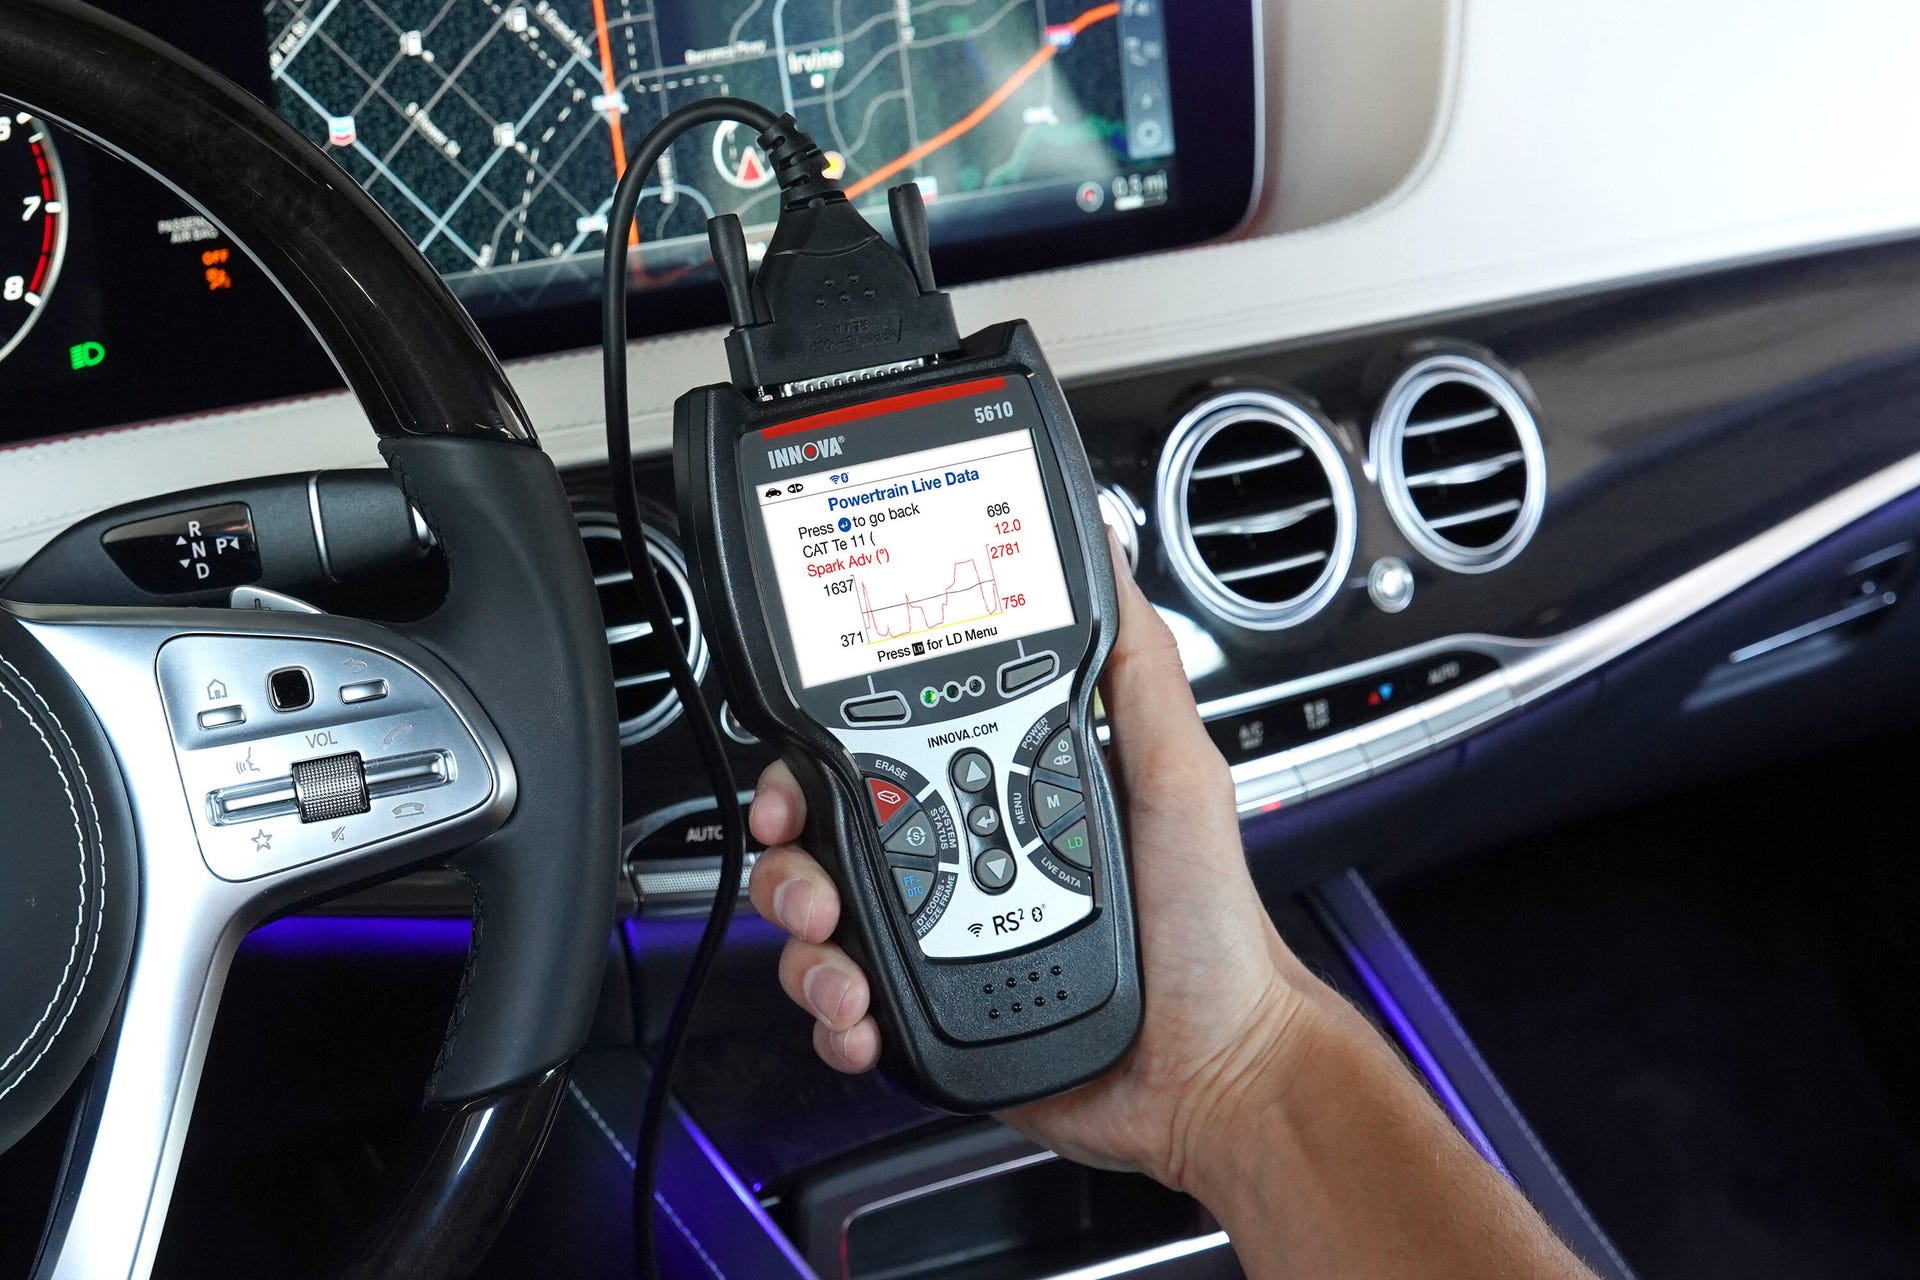 A hand holding up an OBD2 scanner.